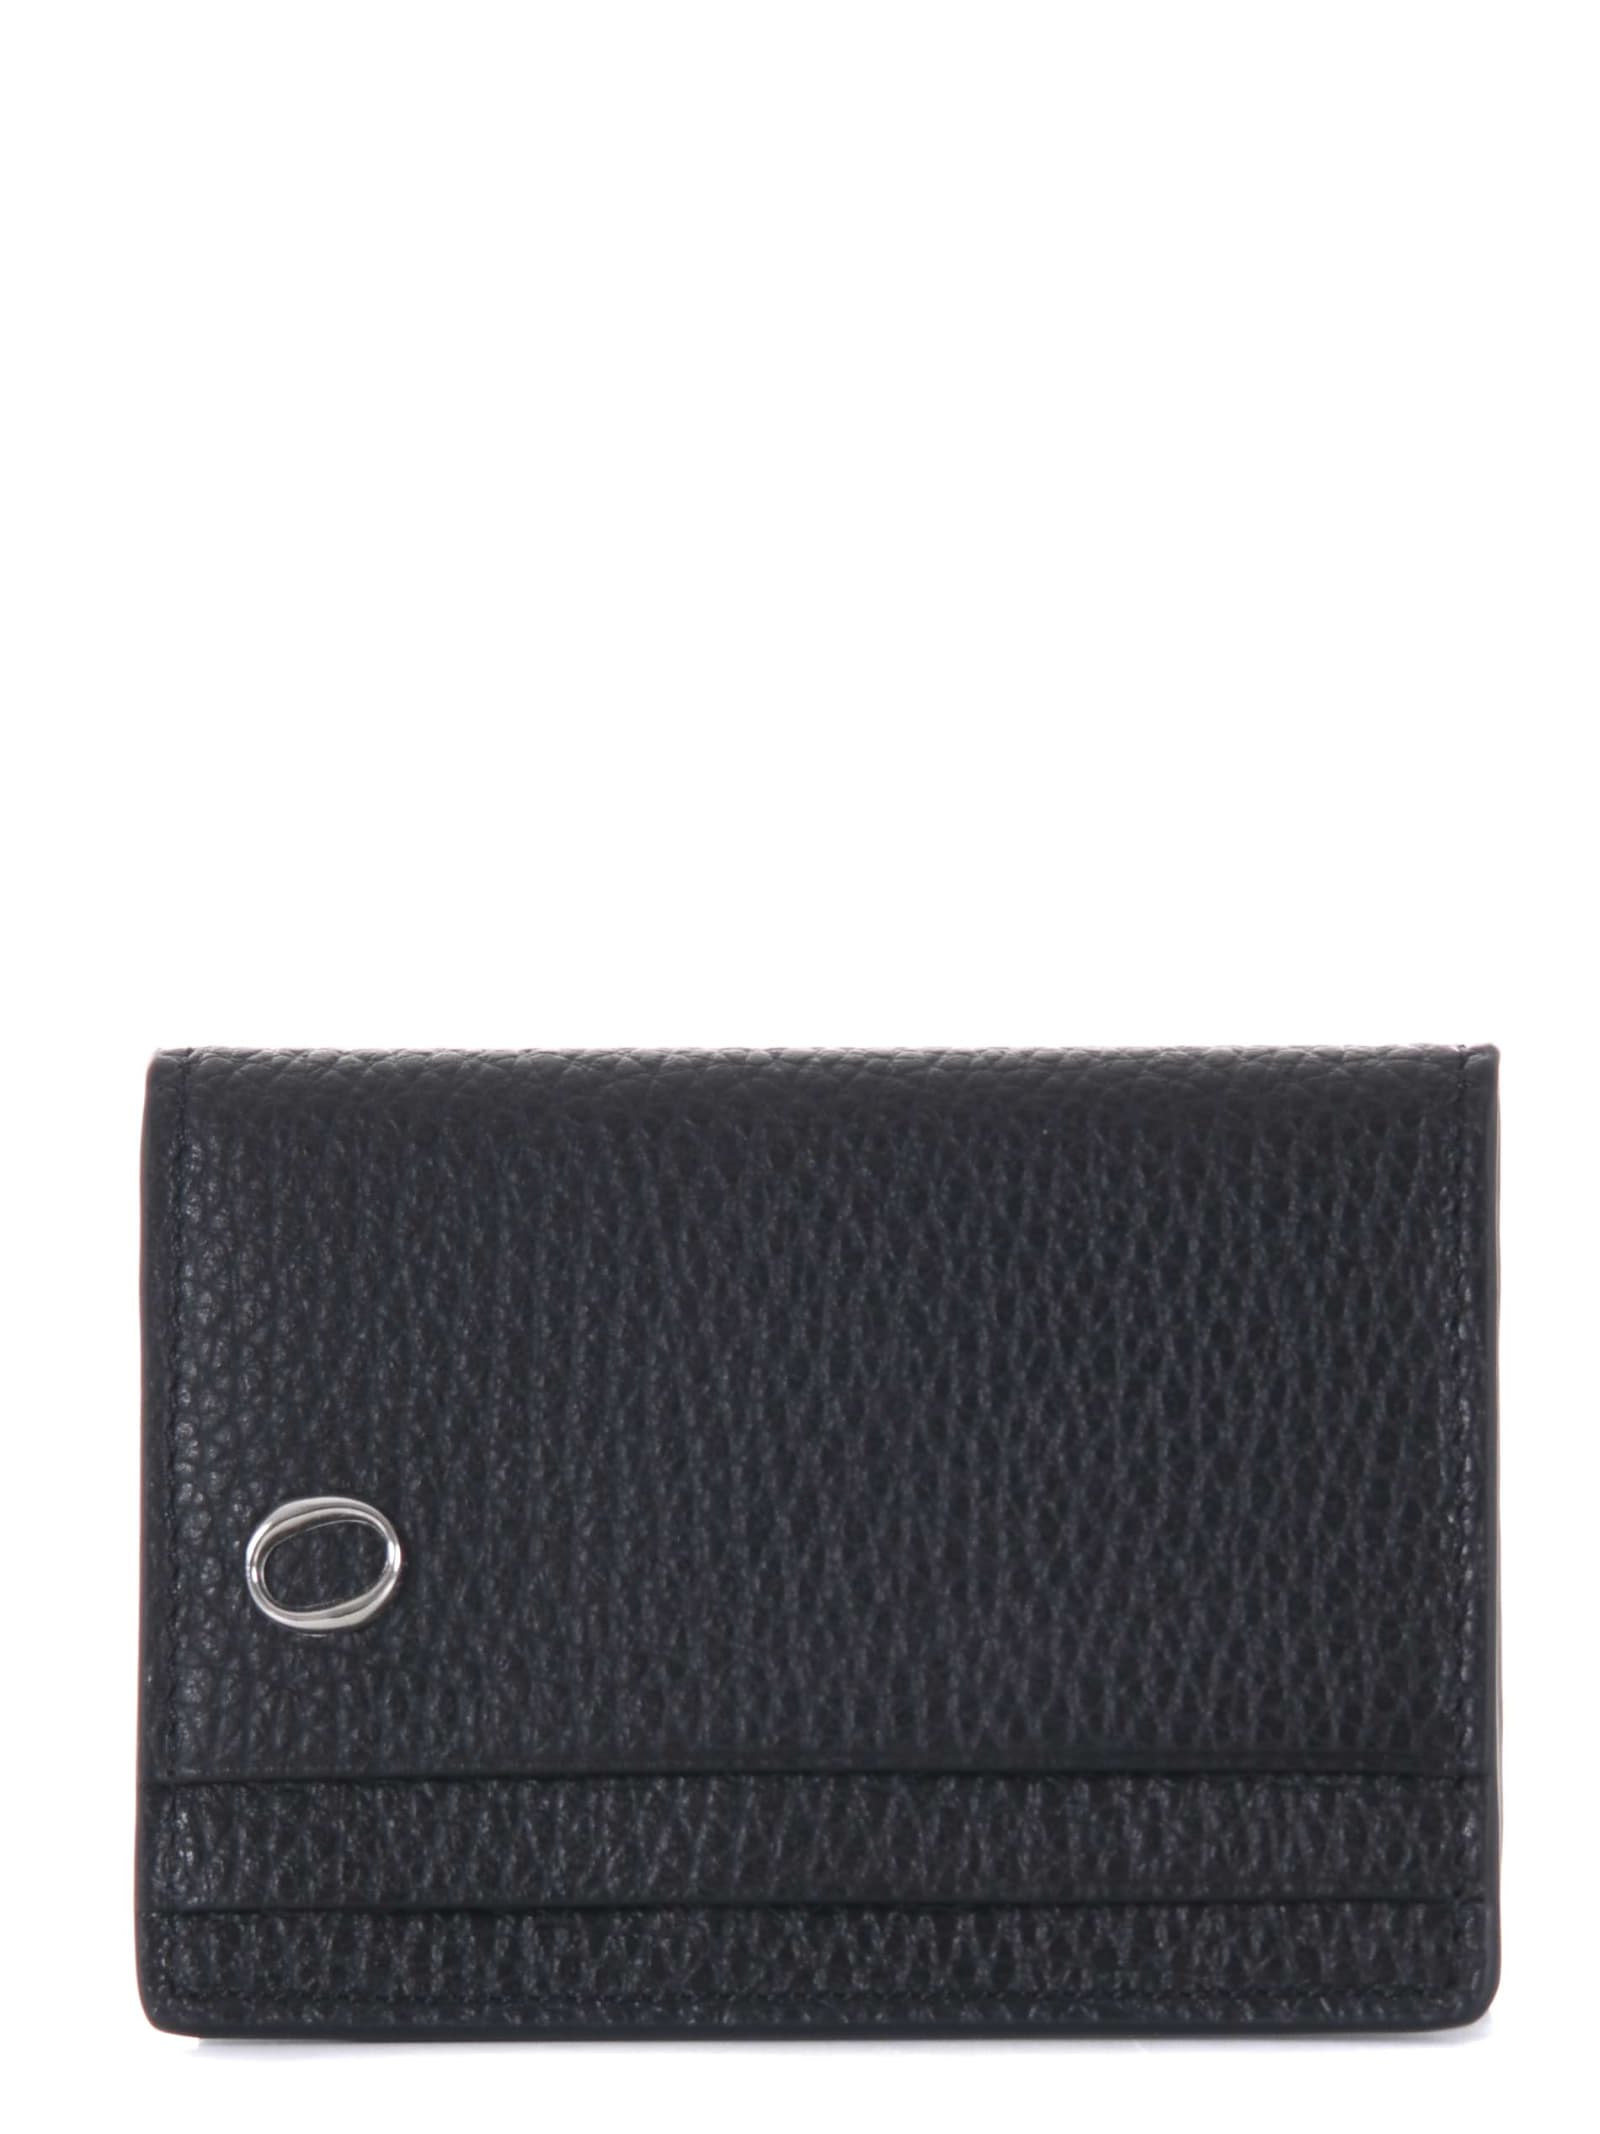 Orciani Card Holder In Black